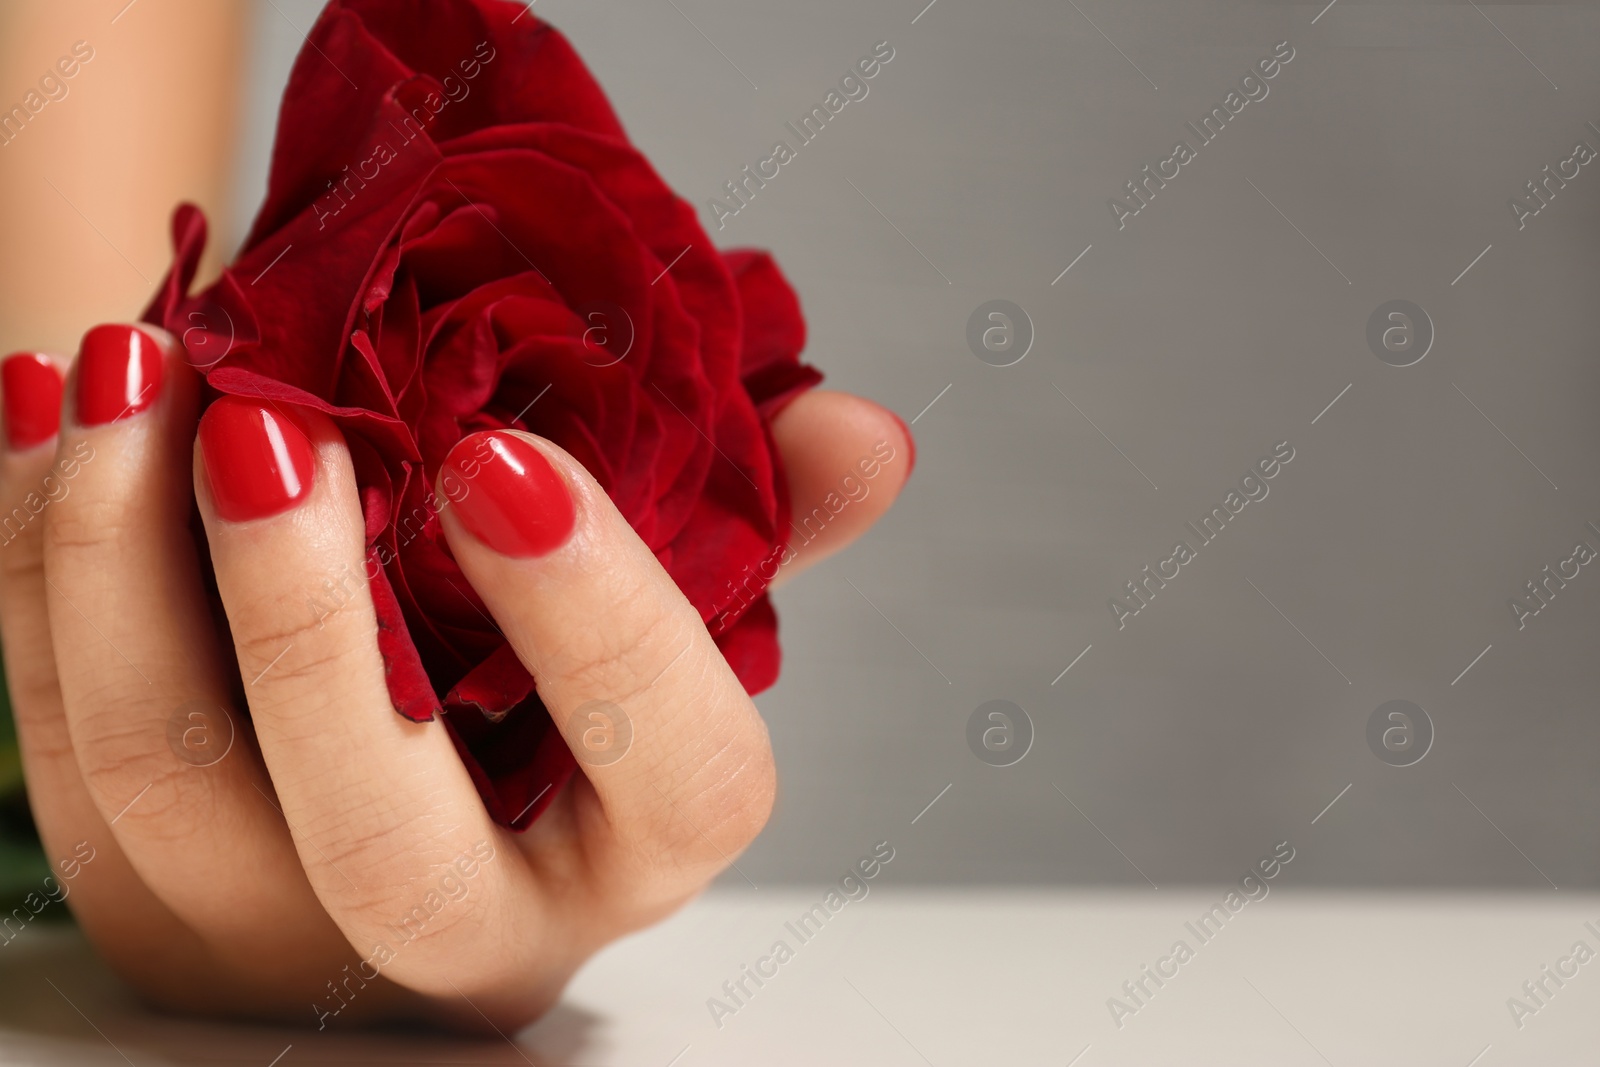 Photo of Woman with red manicure holding rose on blurred background, closeup. Nail polish trends